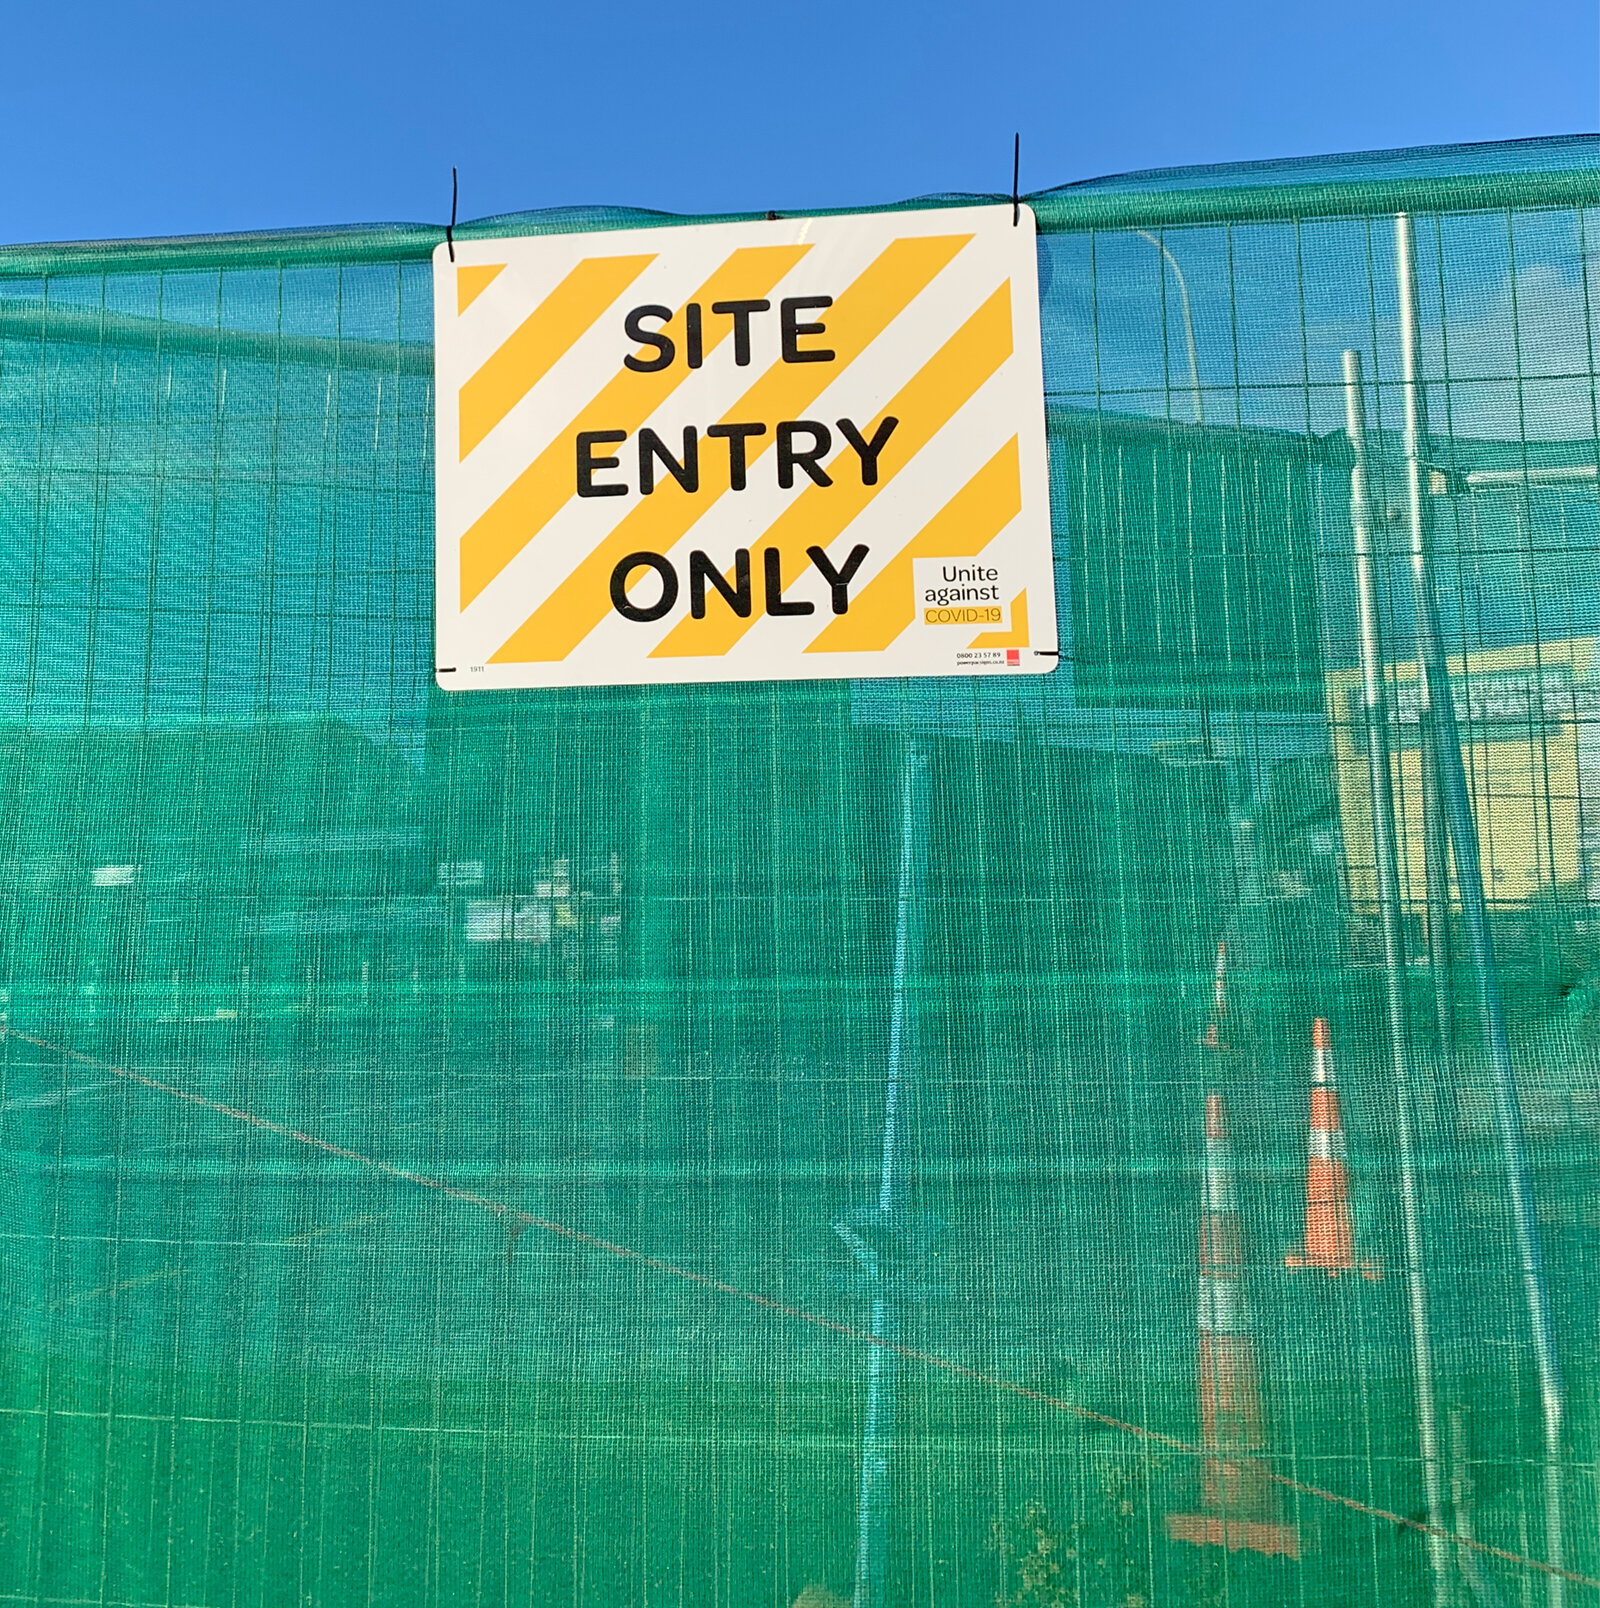  Sites have been fitted with new safety signage  